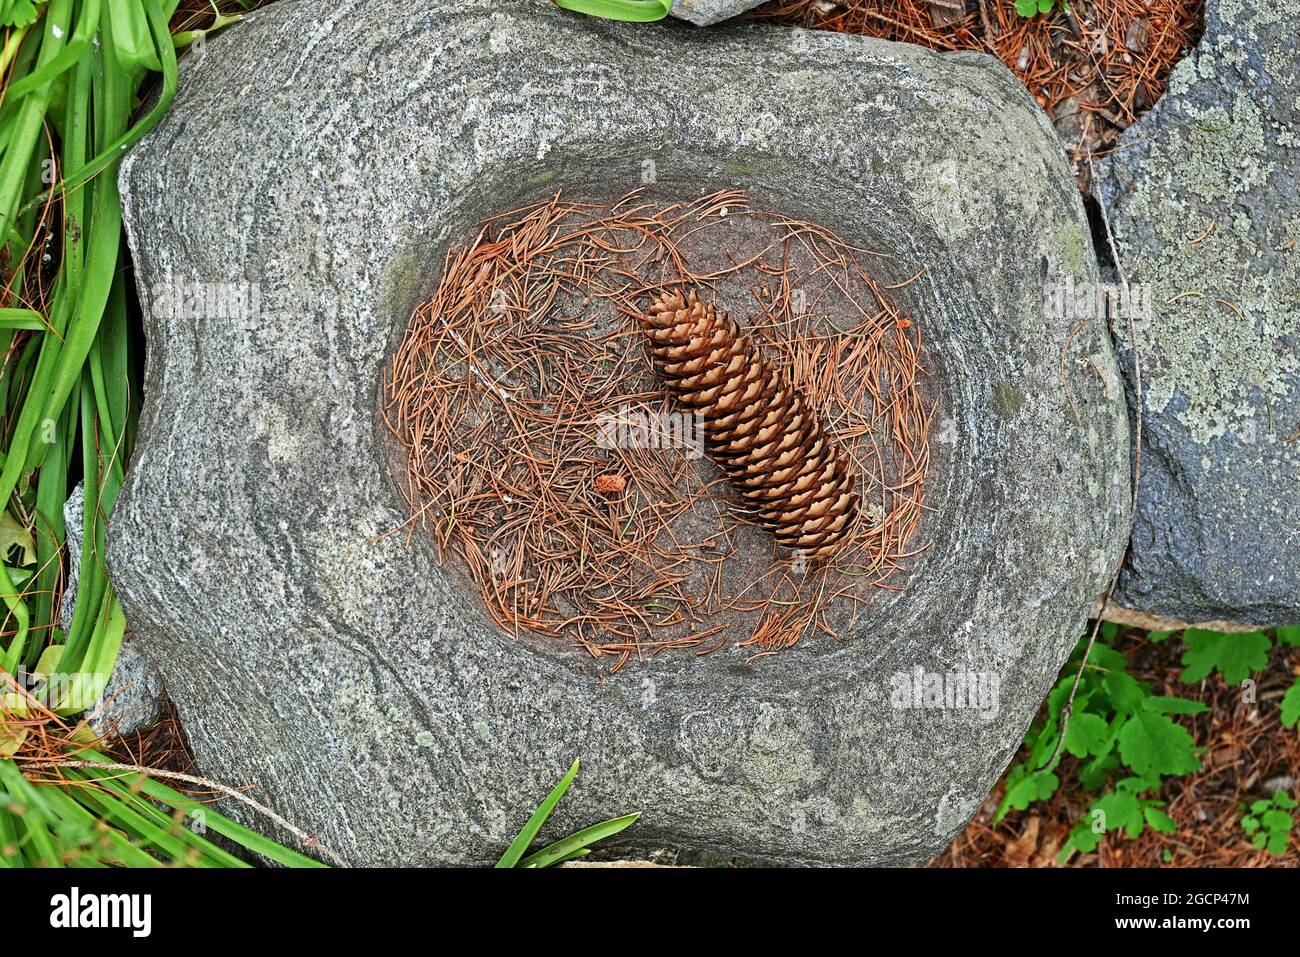 A stone basin with a pine cone and pine needles. Stock Photo